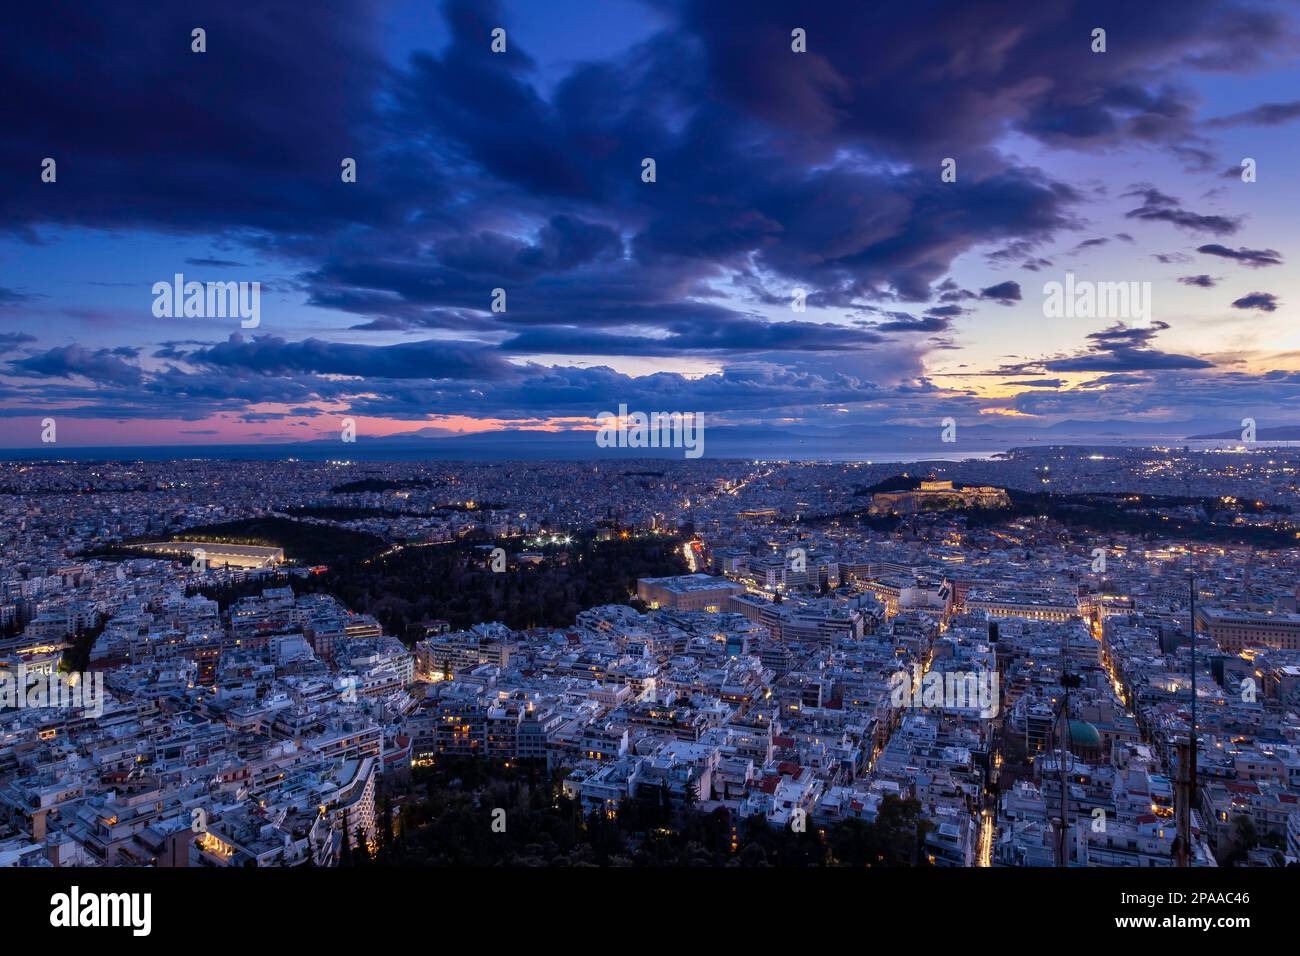 View of the city of Athens, during a glorious sunset. On the right there can be seen Acropolis and the Parthenon, and on bottom left the Parliament. Stock Photo